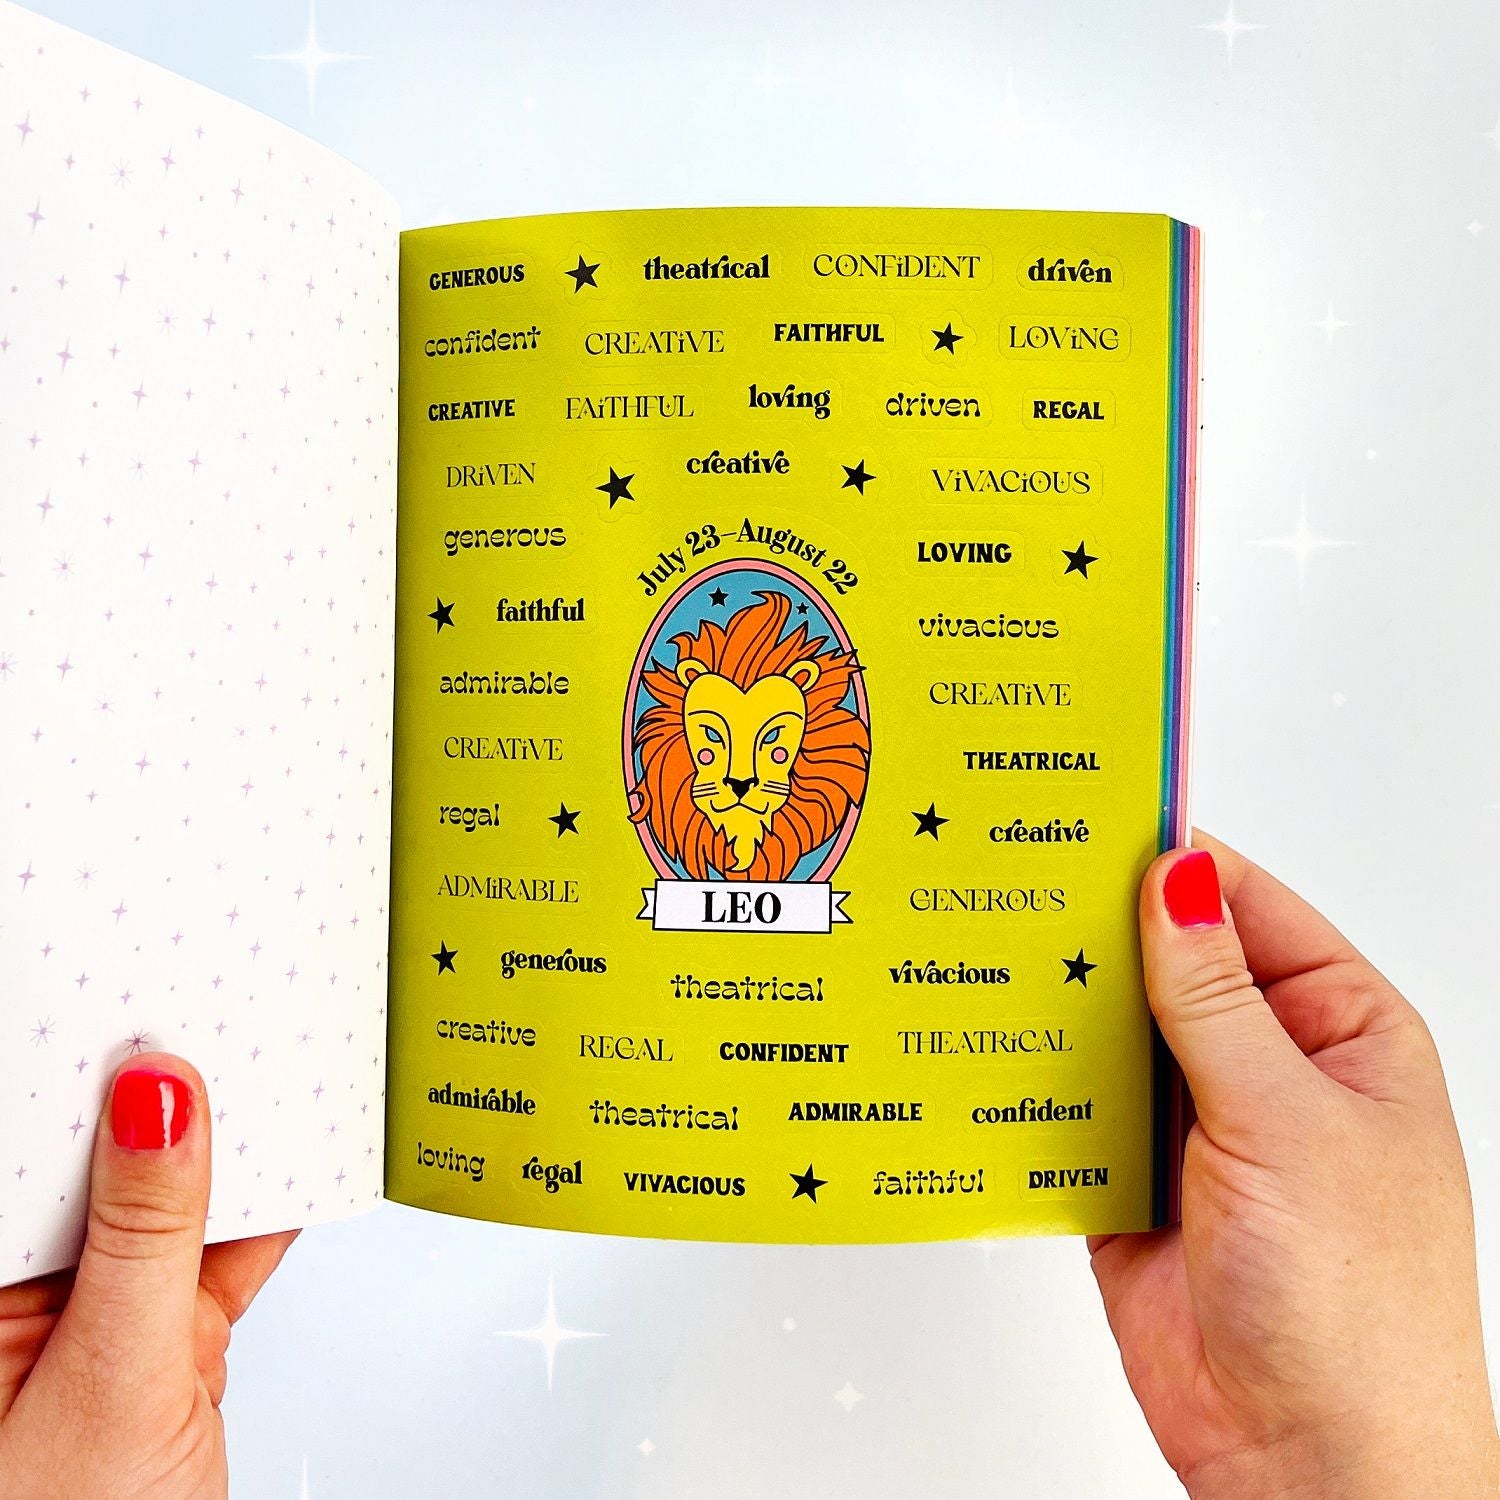 So. Many. Astrology Stickers. Book